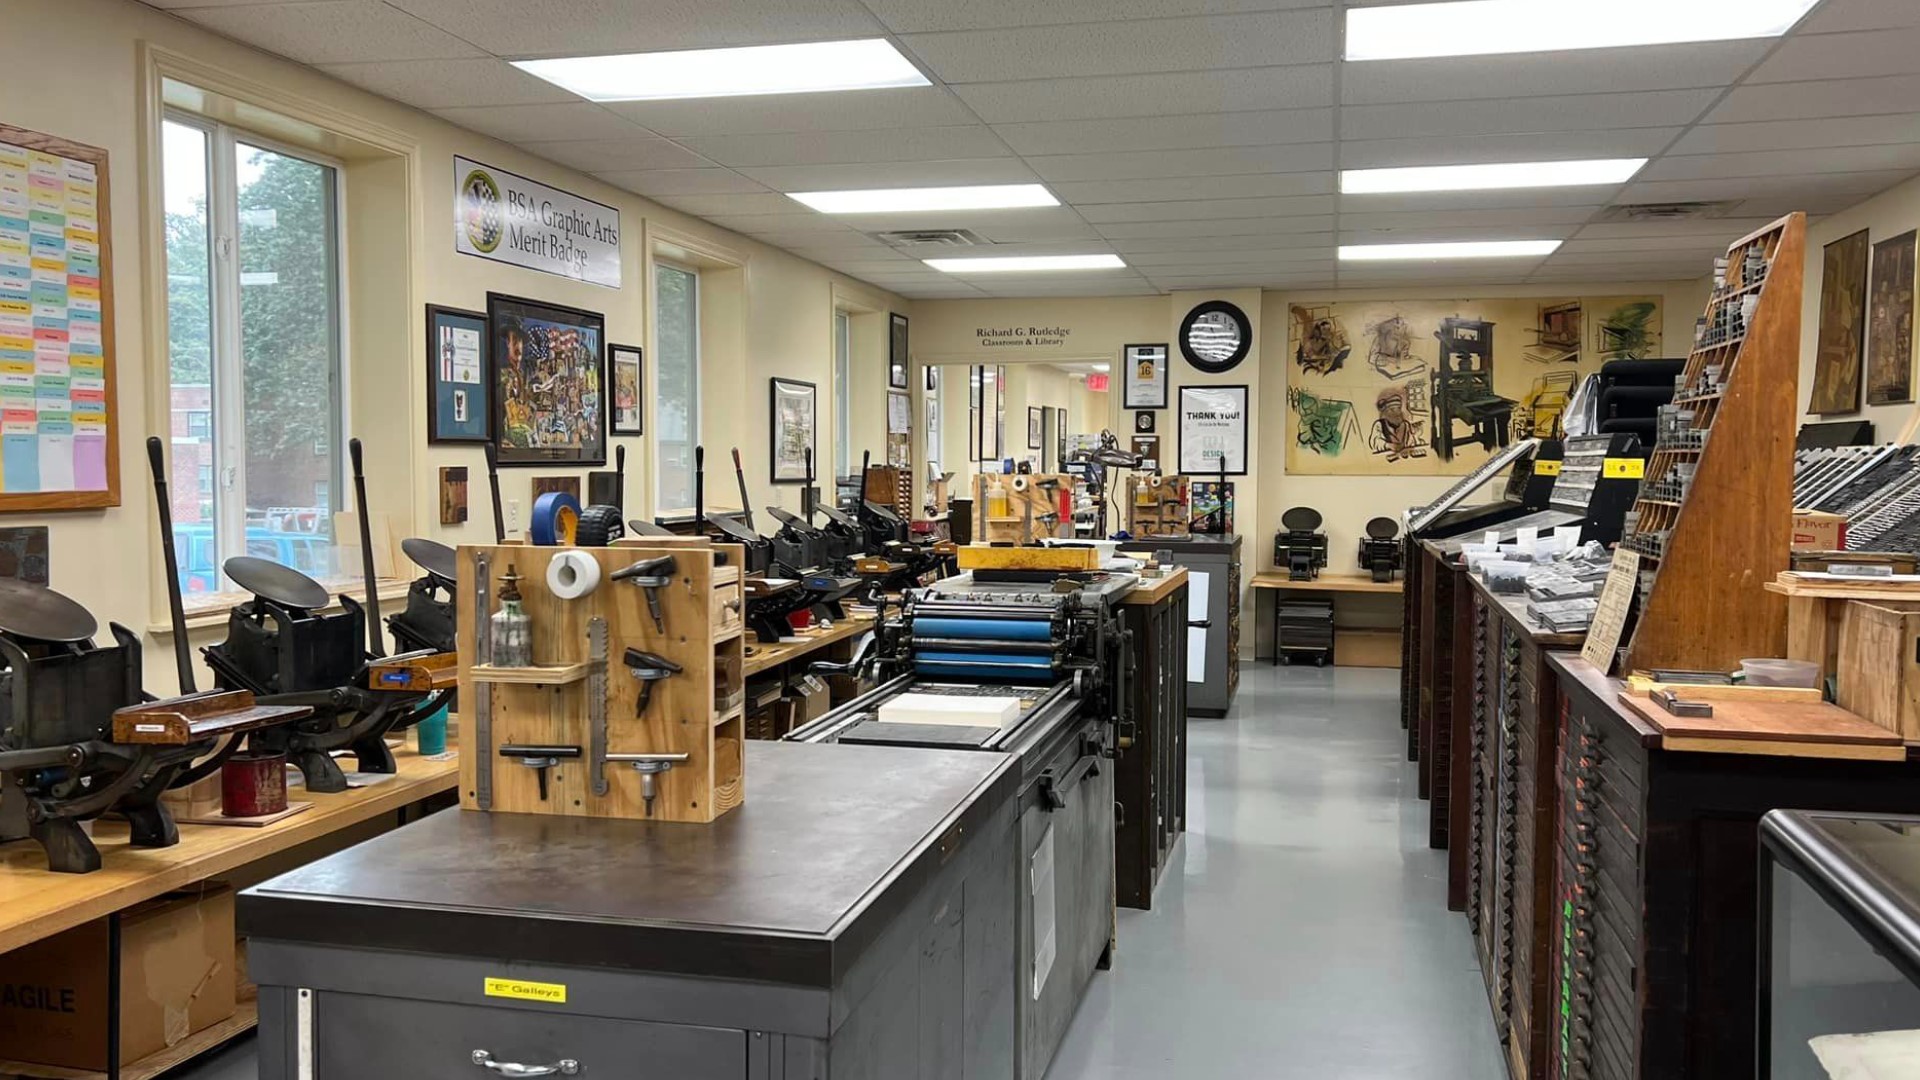 The .918 Club has used a building on the Thaddeus Stevens campus to keep the art of letterpress printing alive since 2009. Now it's being asked to leave.